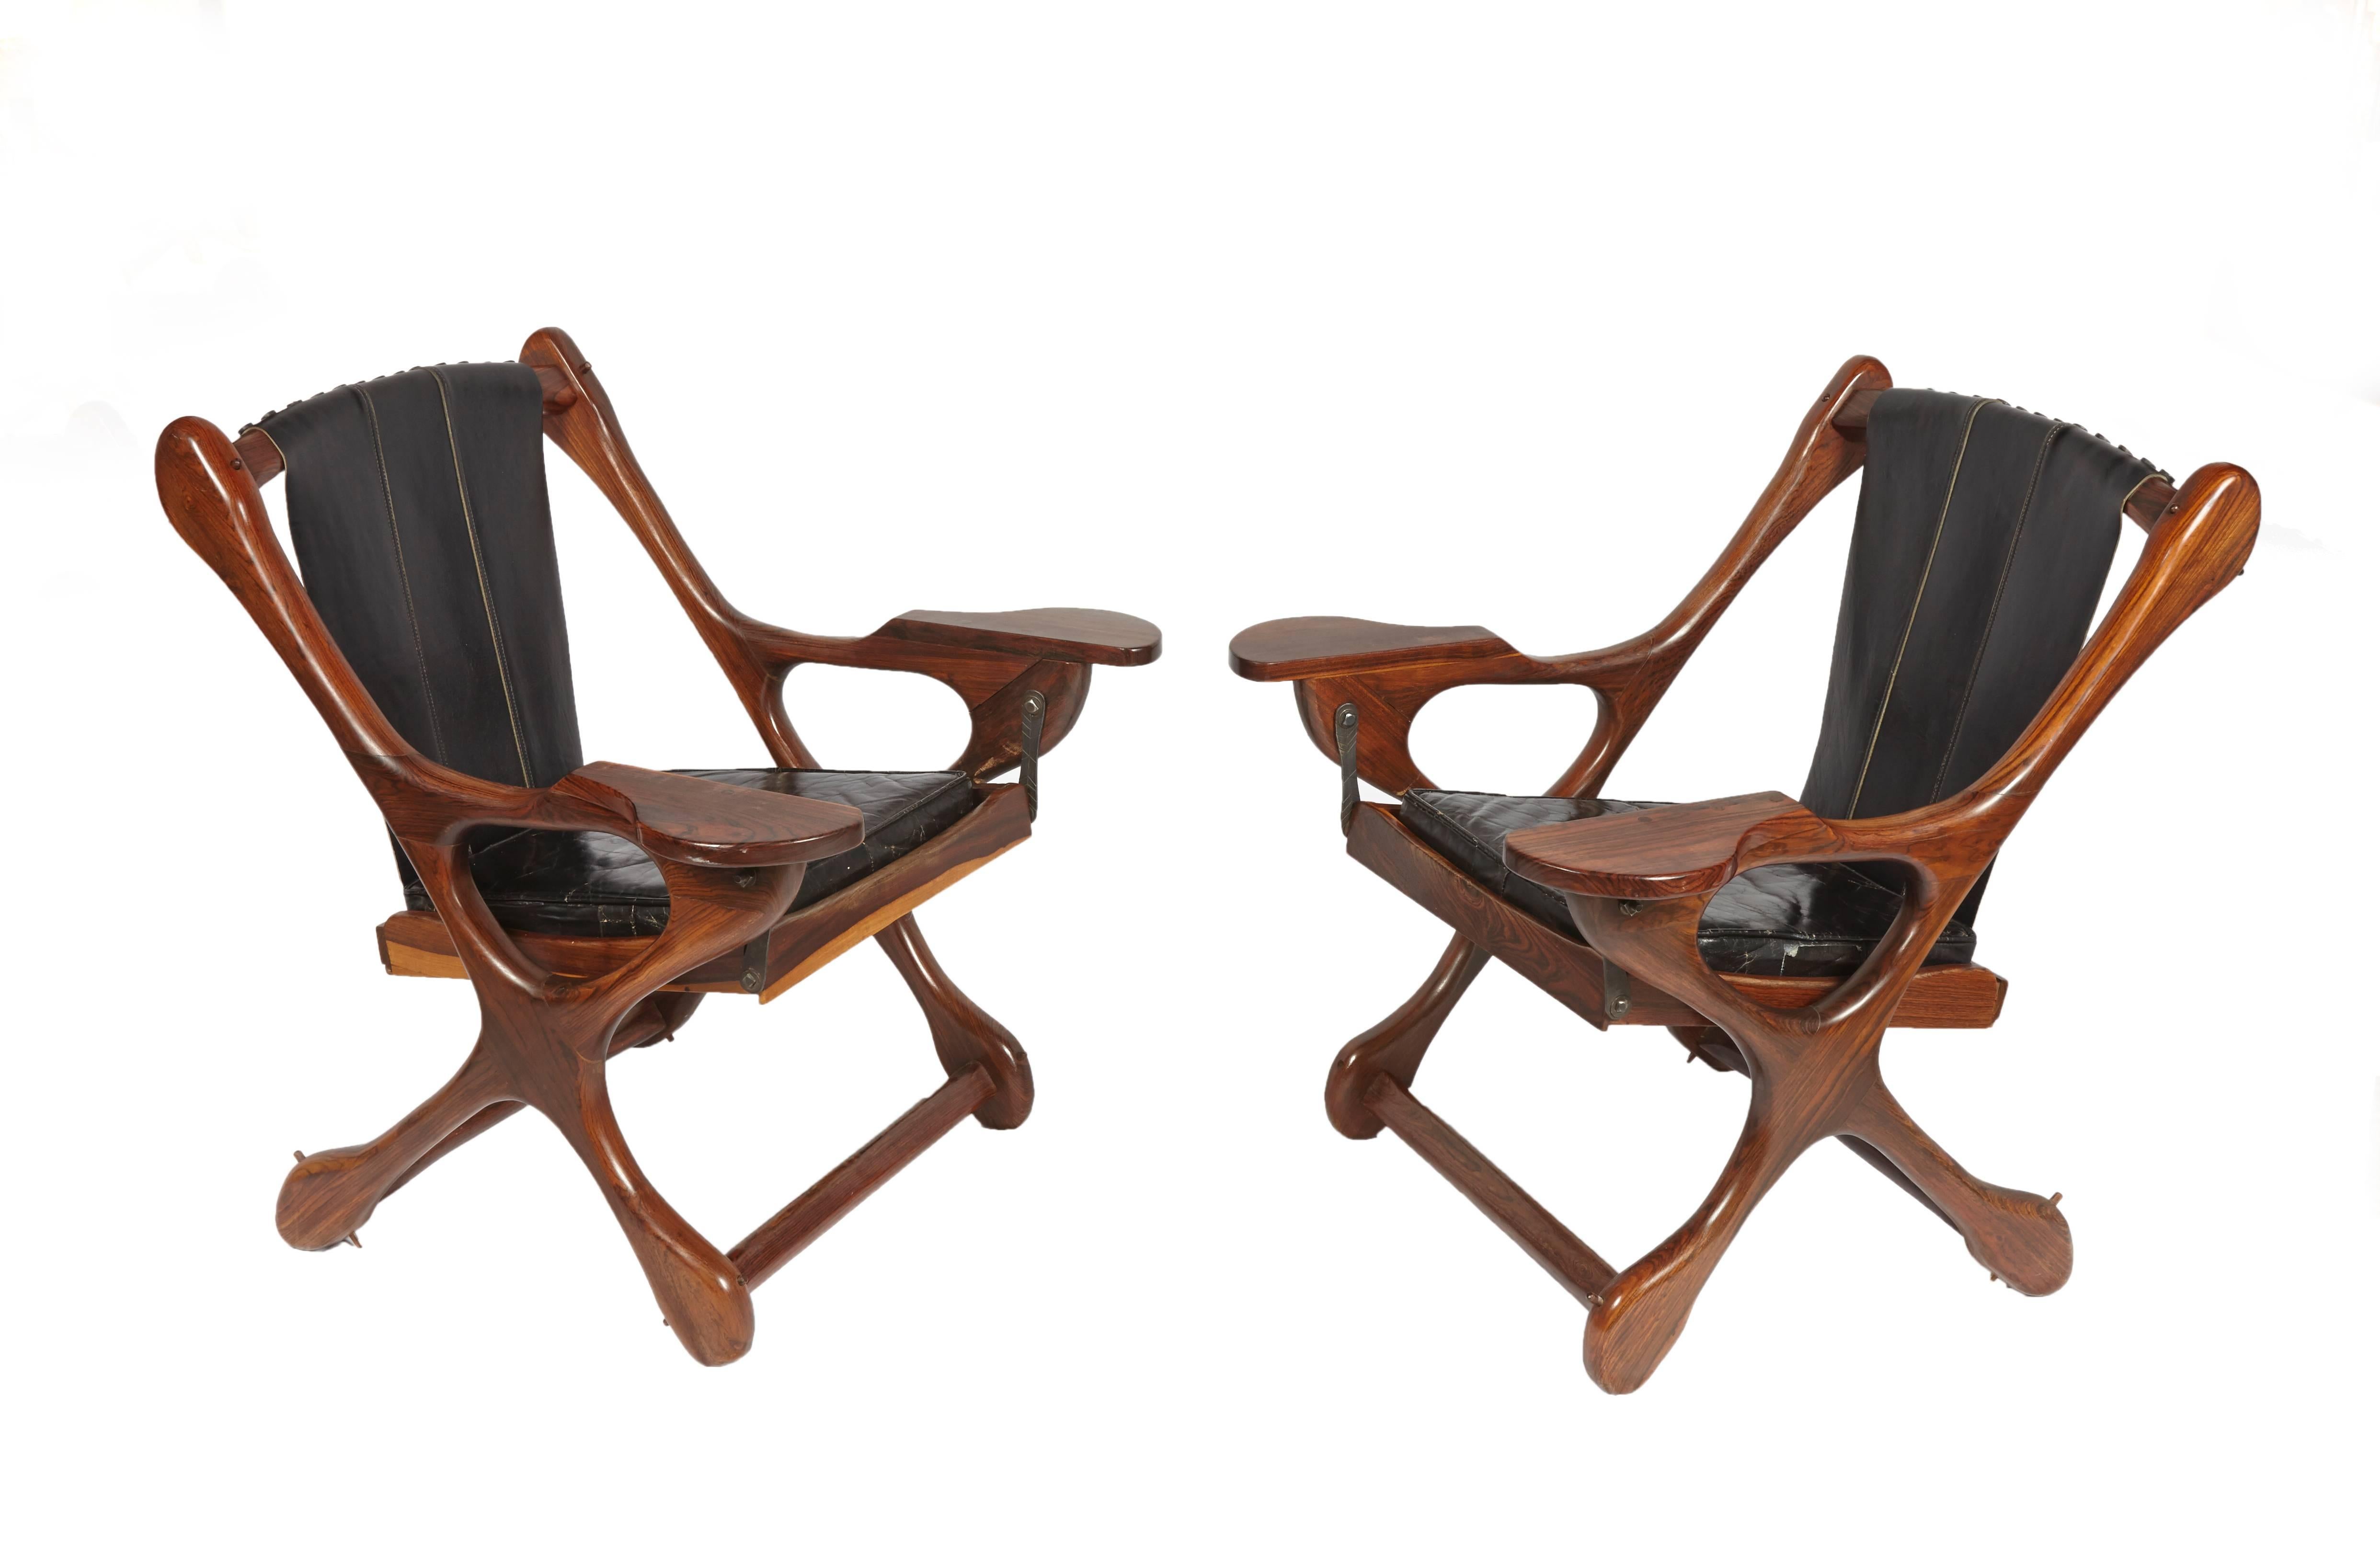 Pair of Don S. Shoemaker Sling swinger chairs with matching ottoman made of cocobolo wood. Original black leather.
Chairs and footstool have the Senal, S.A. stickers.
 